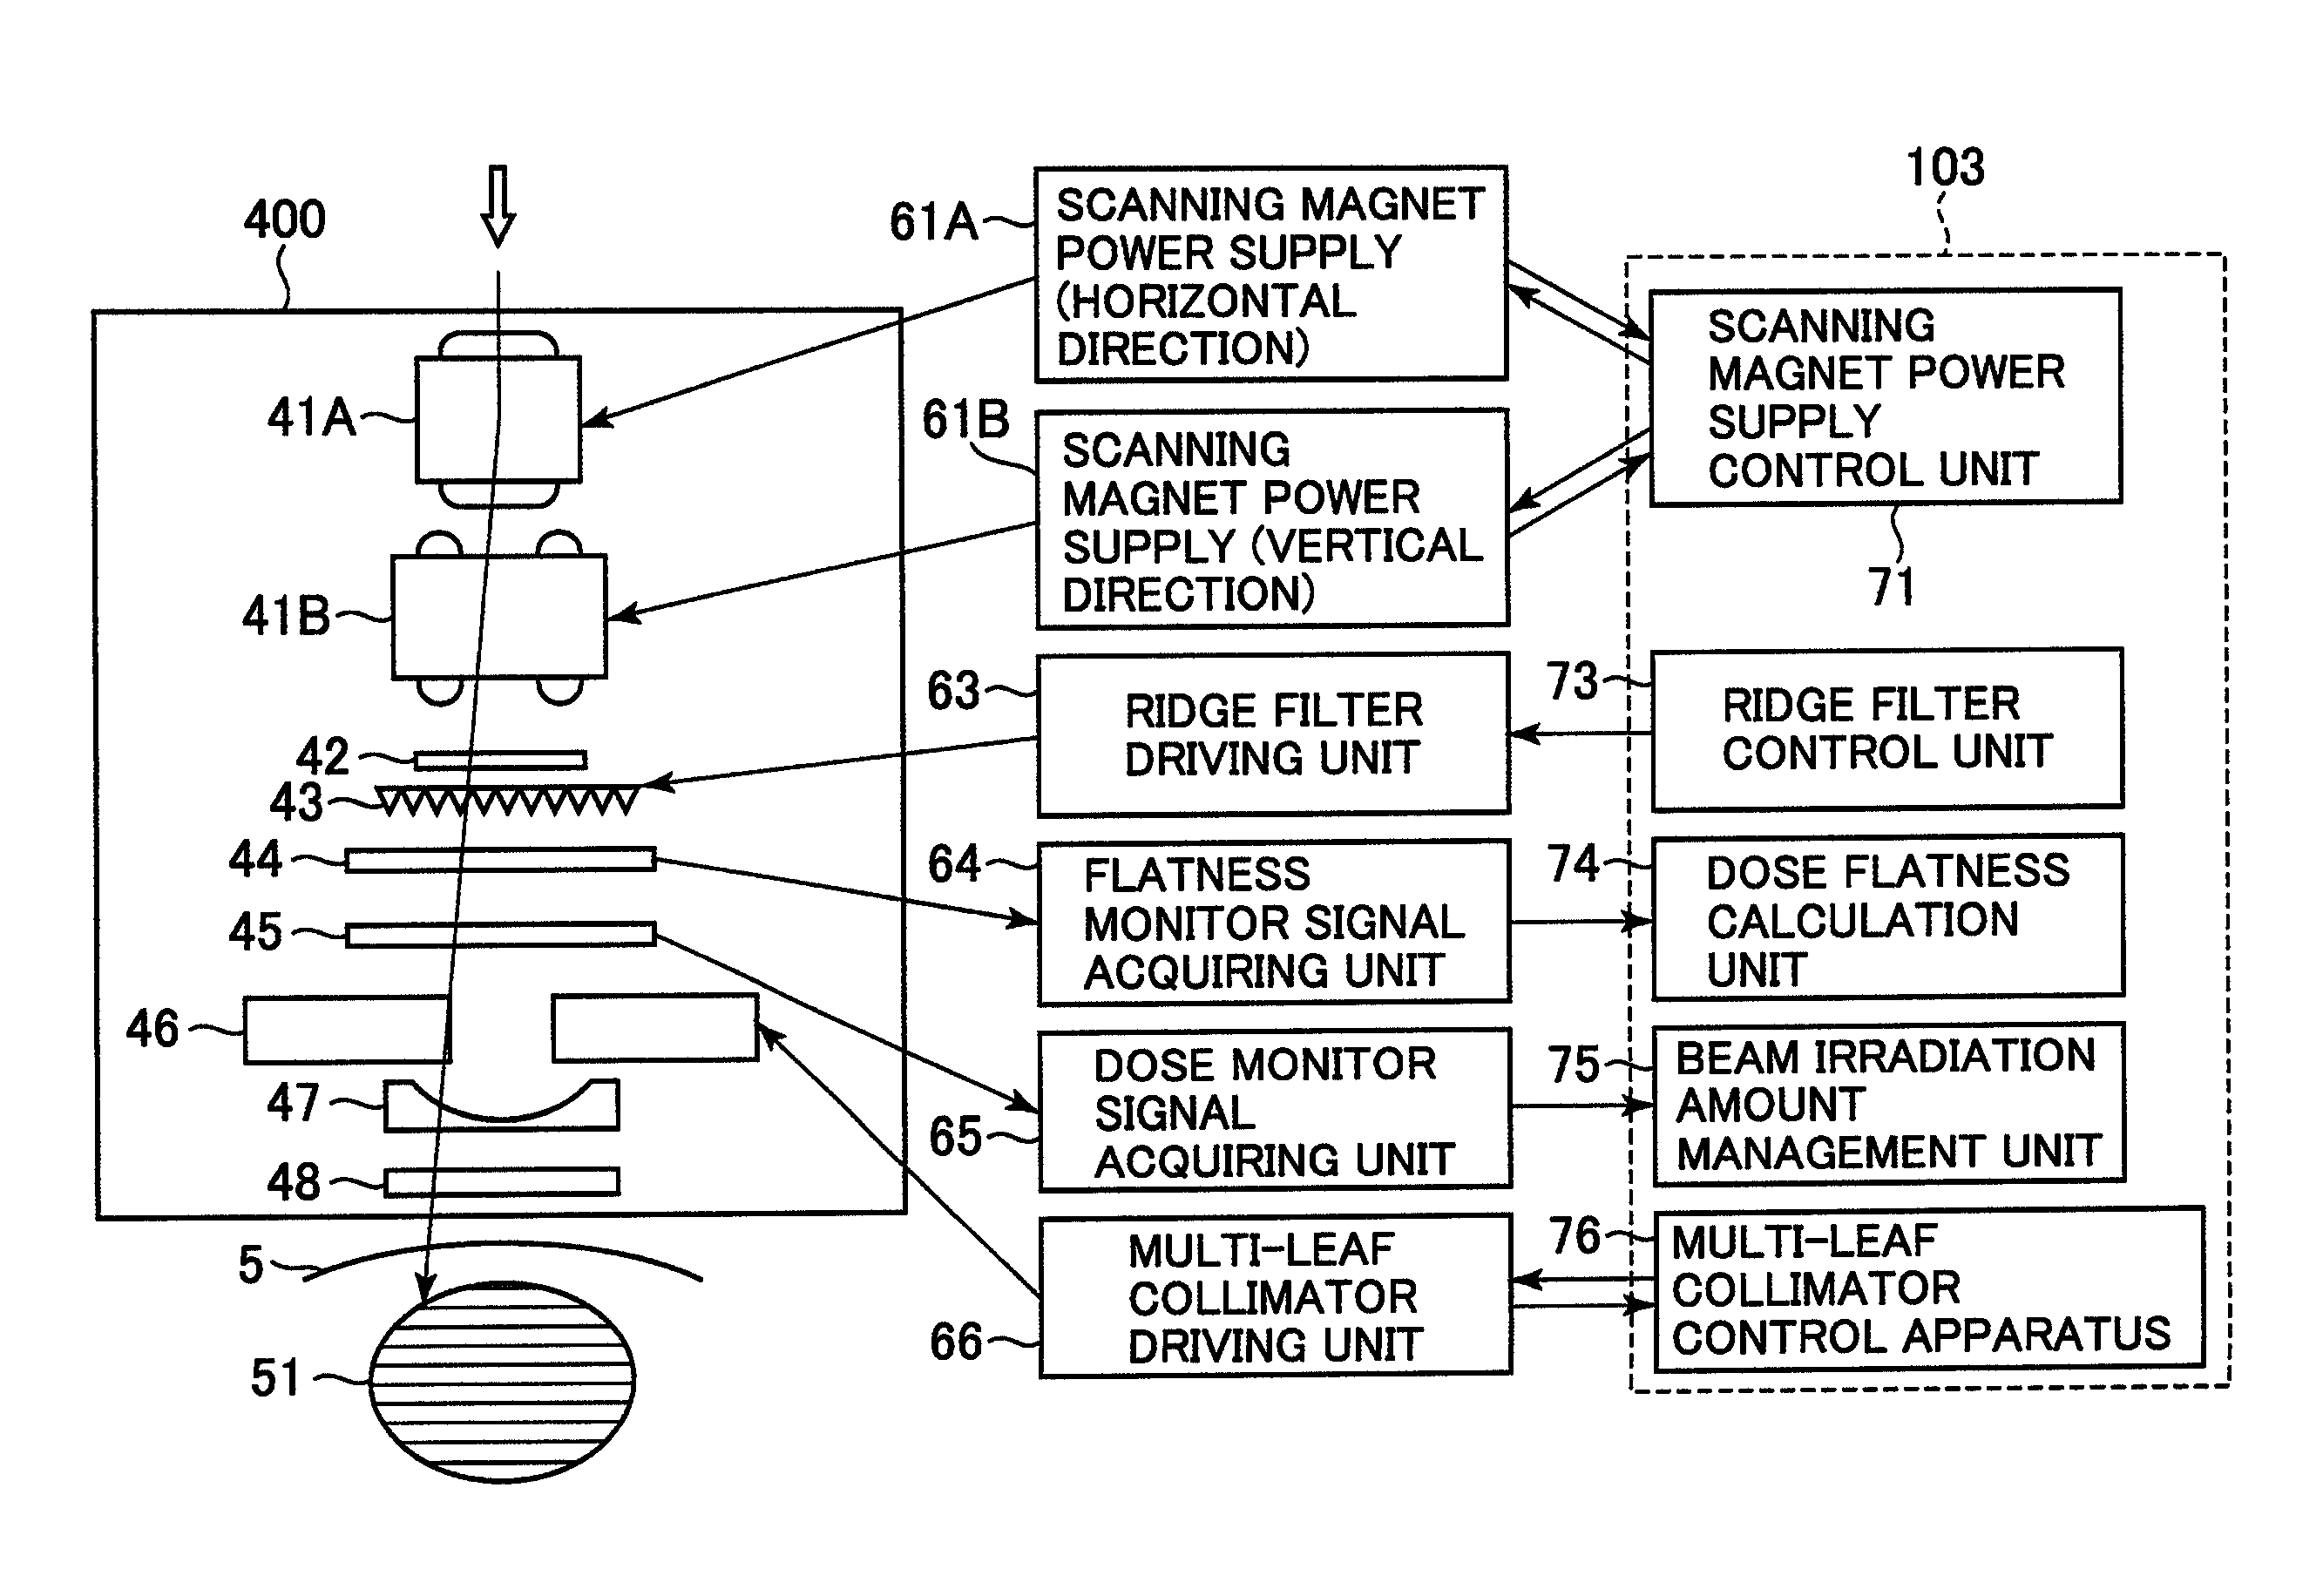 Treatment planning apparatus and particle therapy system